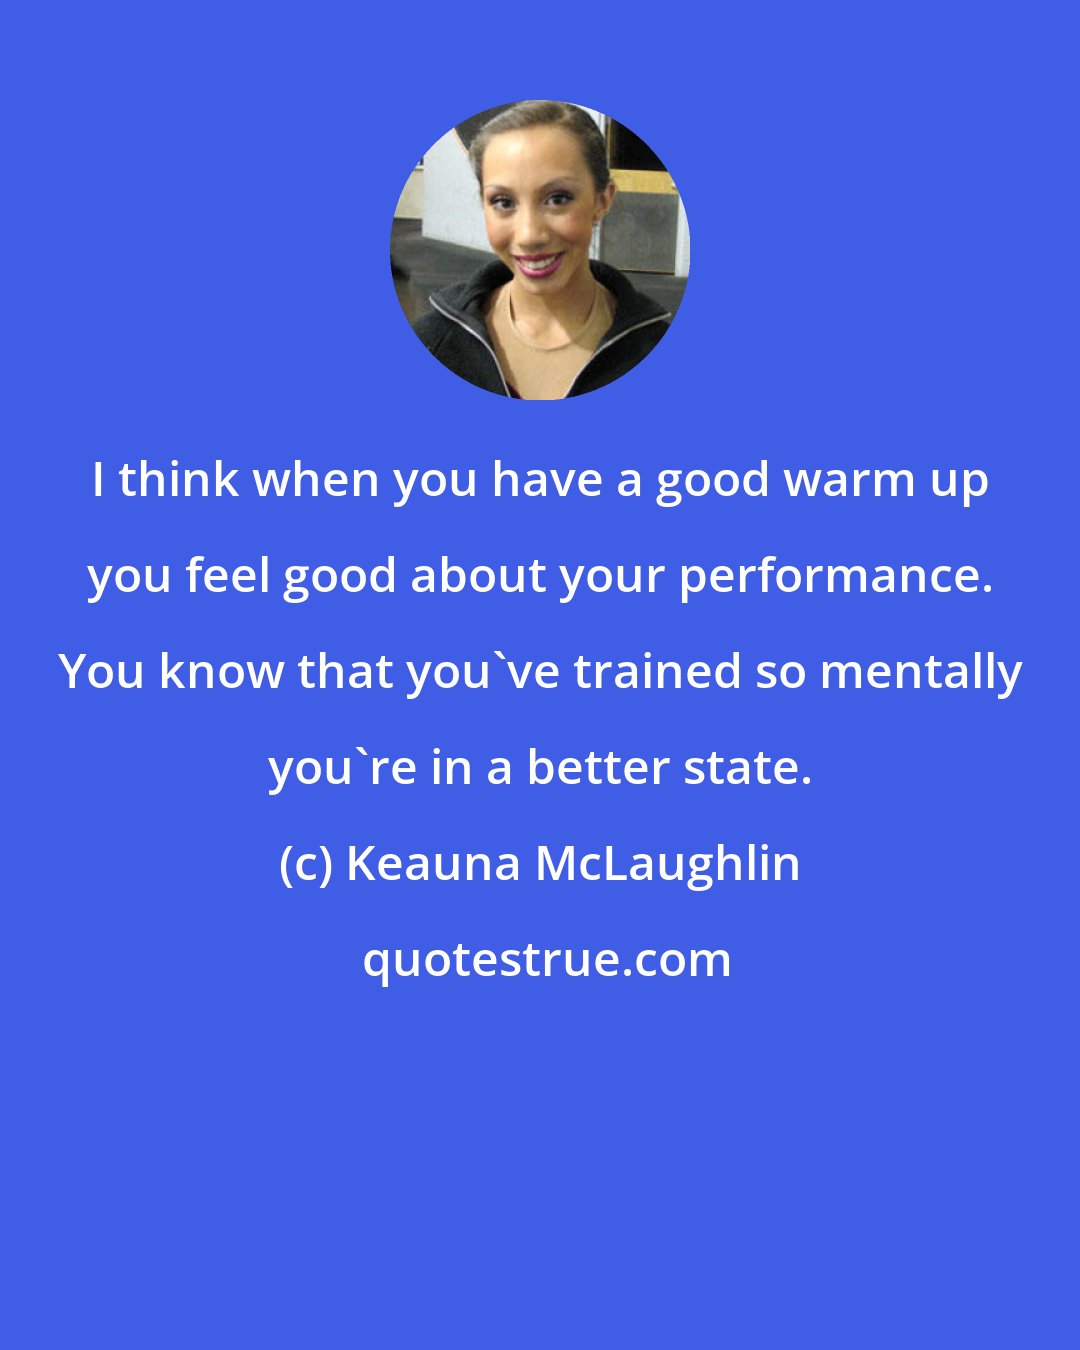 Keauna McLaughlin: I think when you have a good warm up you feel good about your performance. You know that you've trained so mentally you're in a better state.